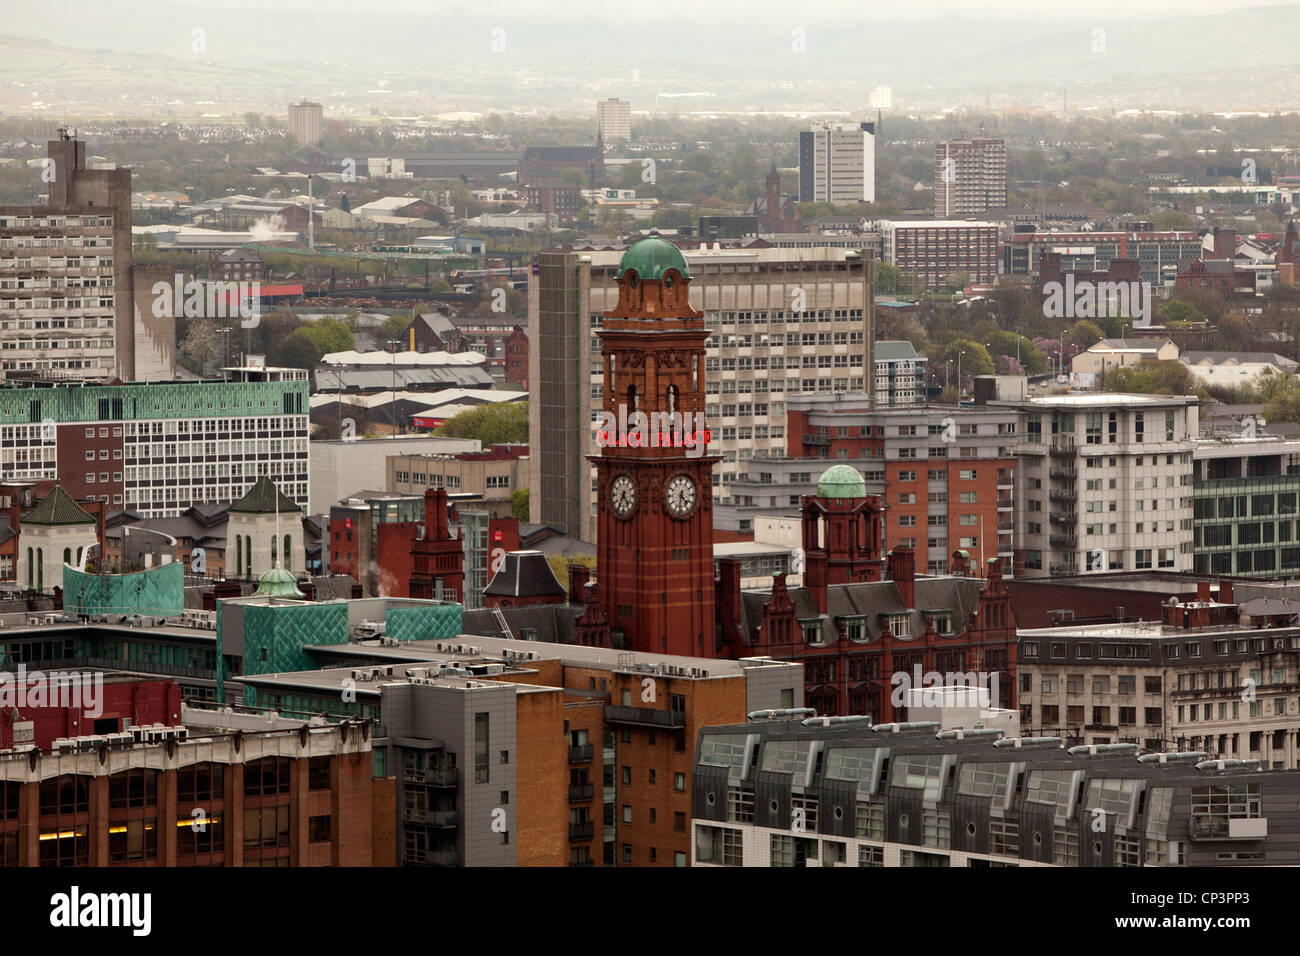 Manchester skyline with Palace Theatre Tower in view . Stock Photo